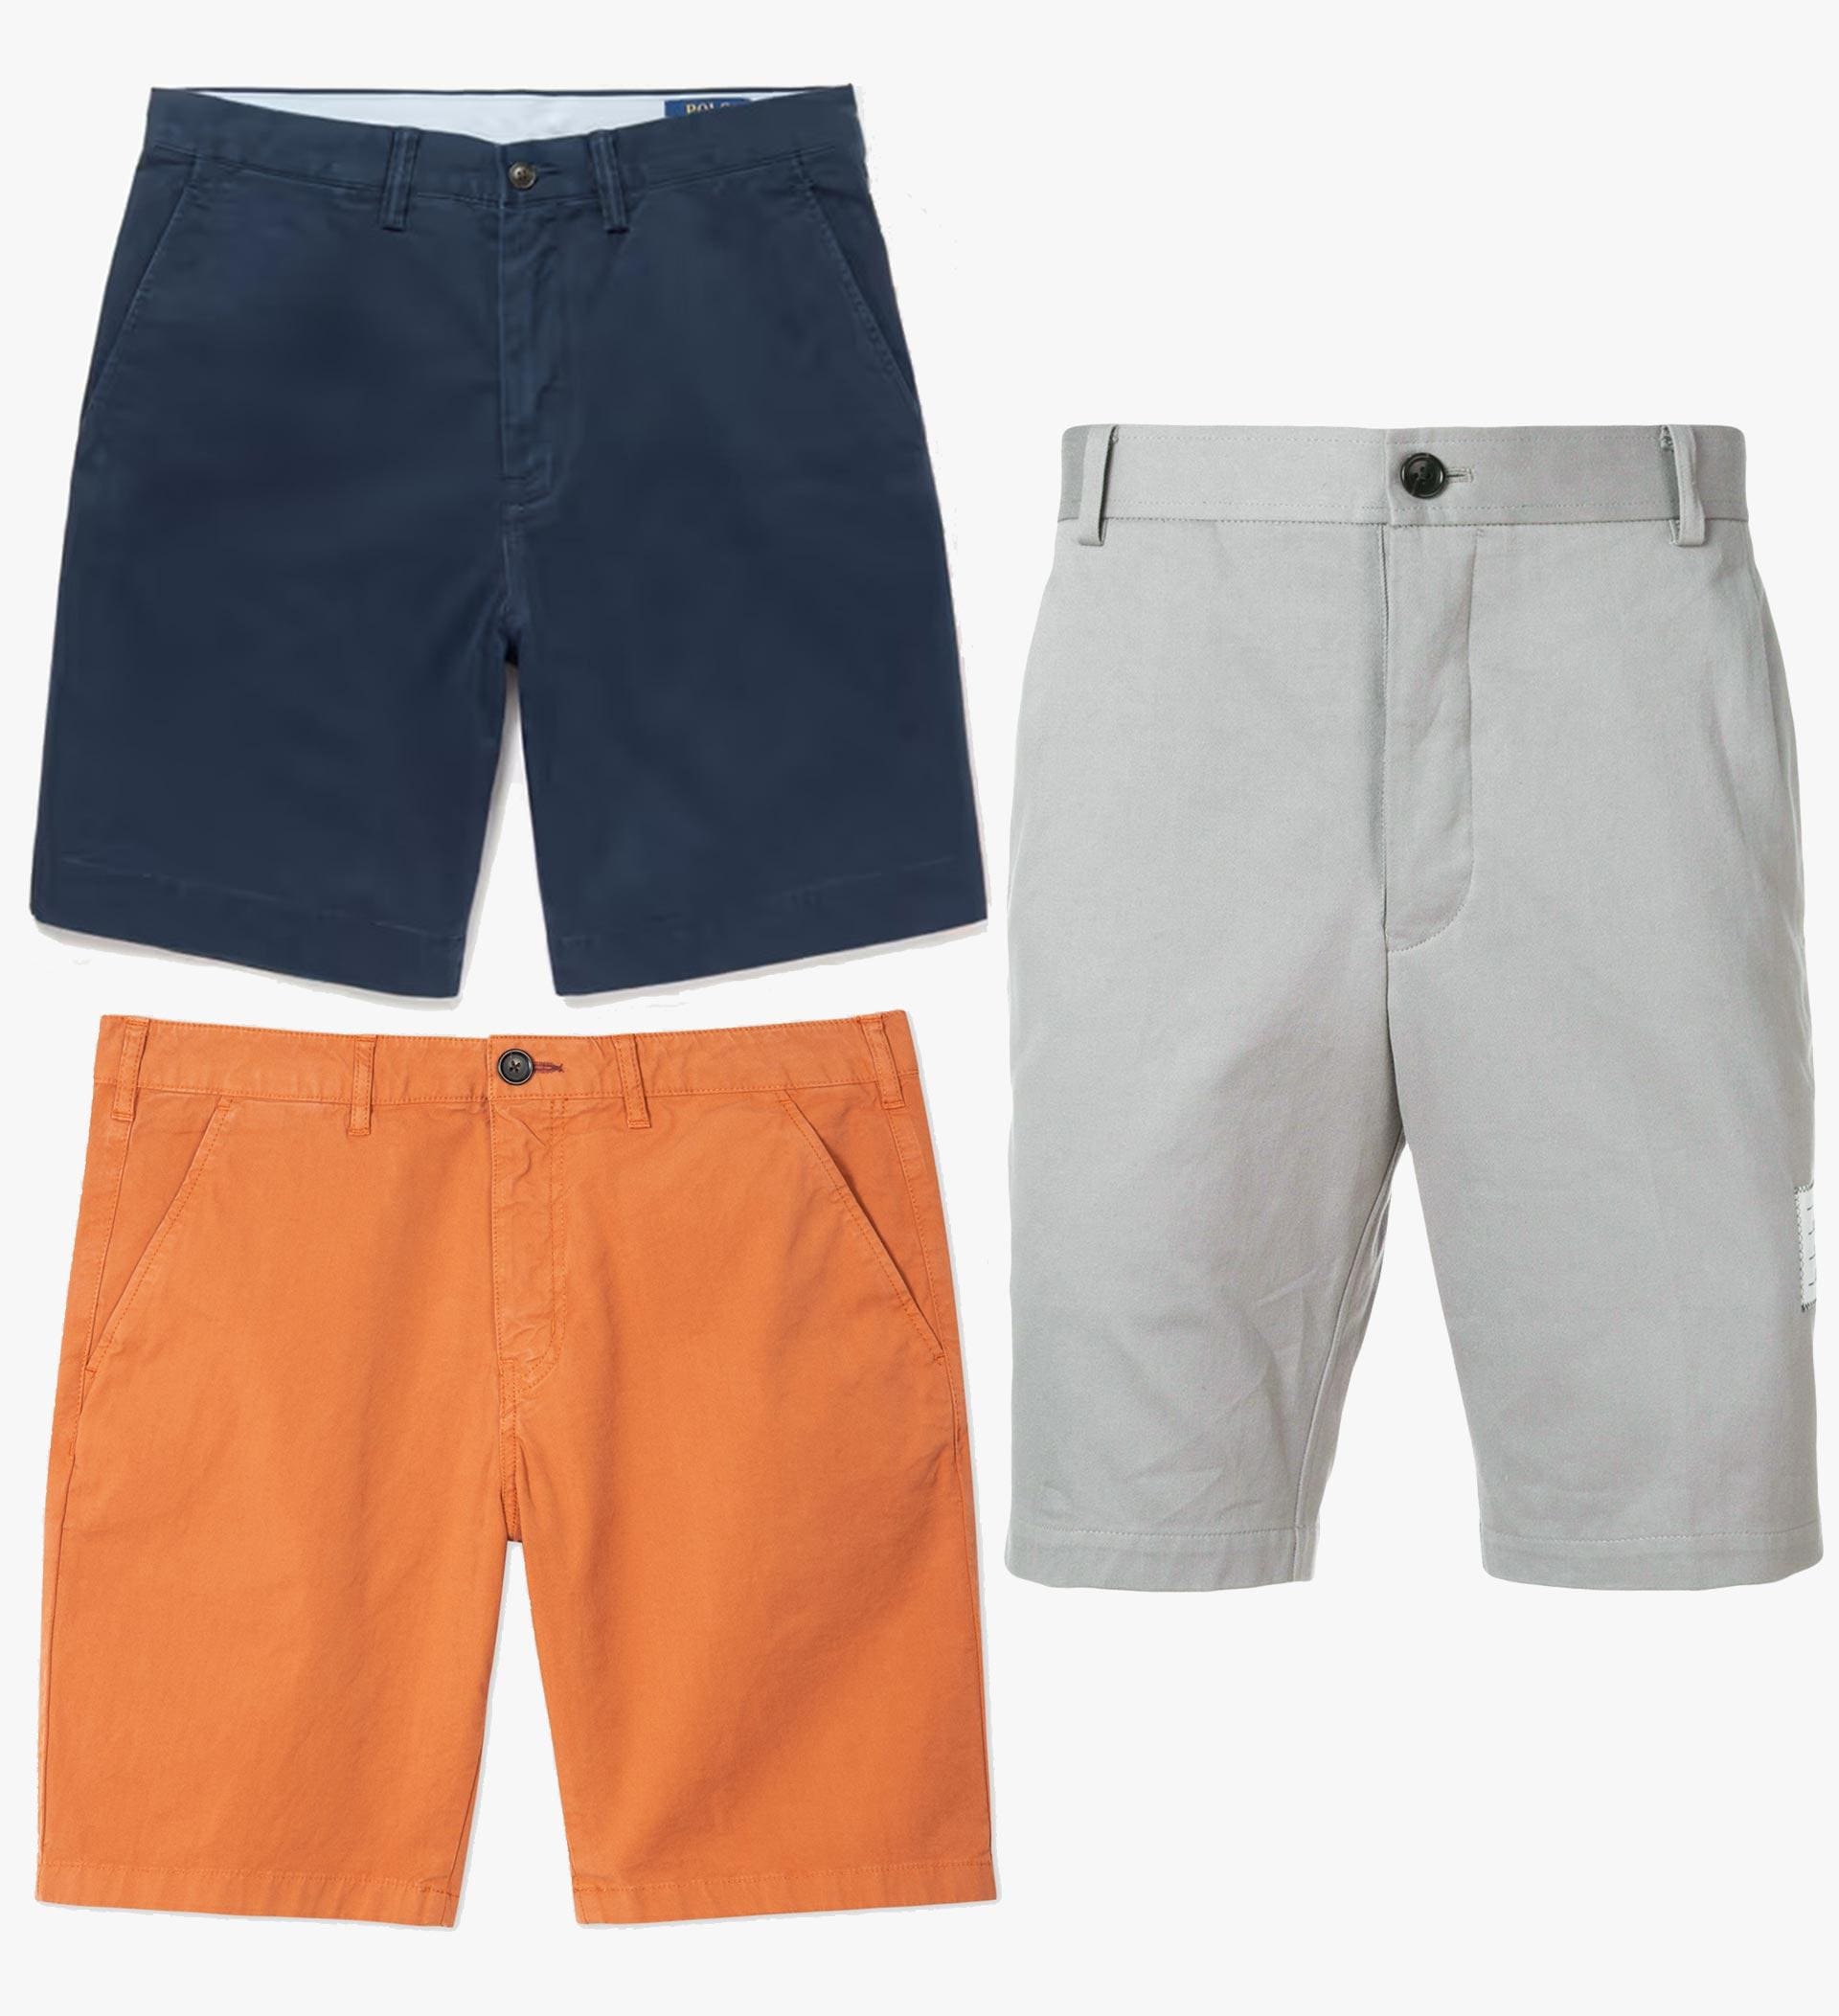 High rise: The best men’s shorts for summer – Luxury London